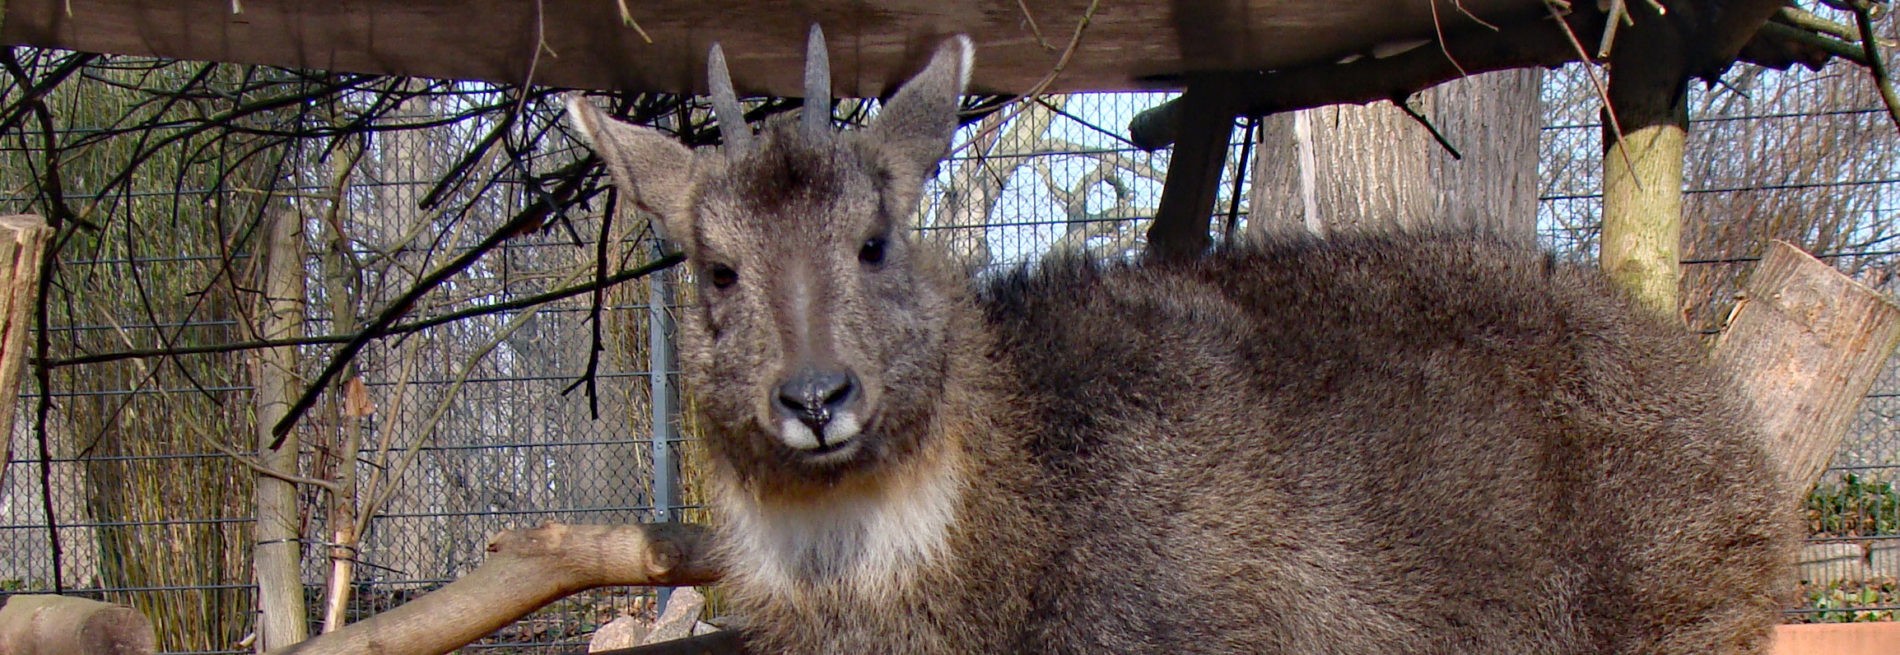 Chinese goral